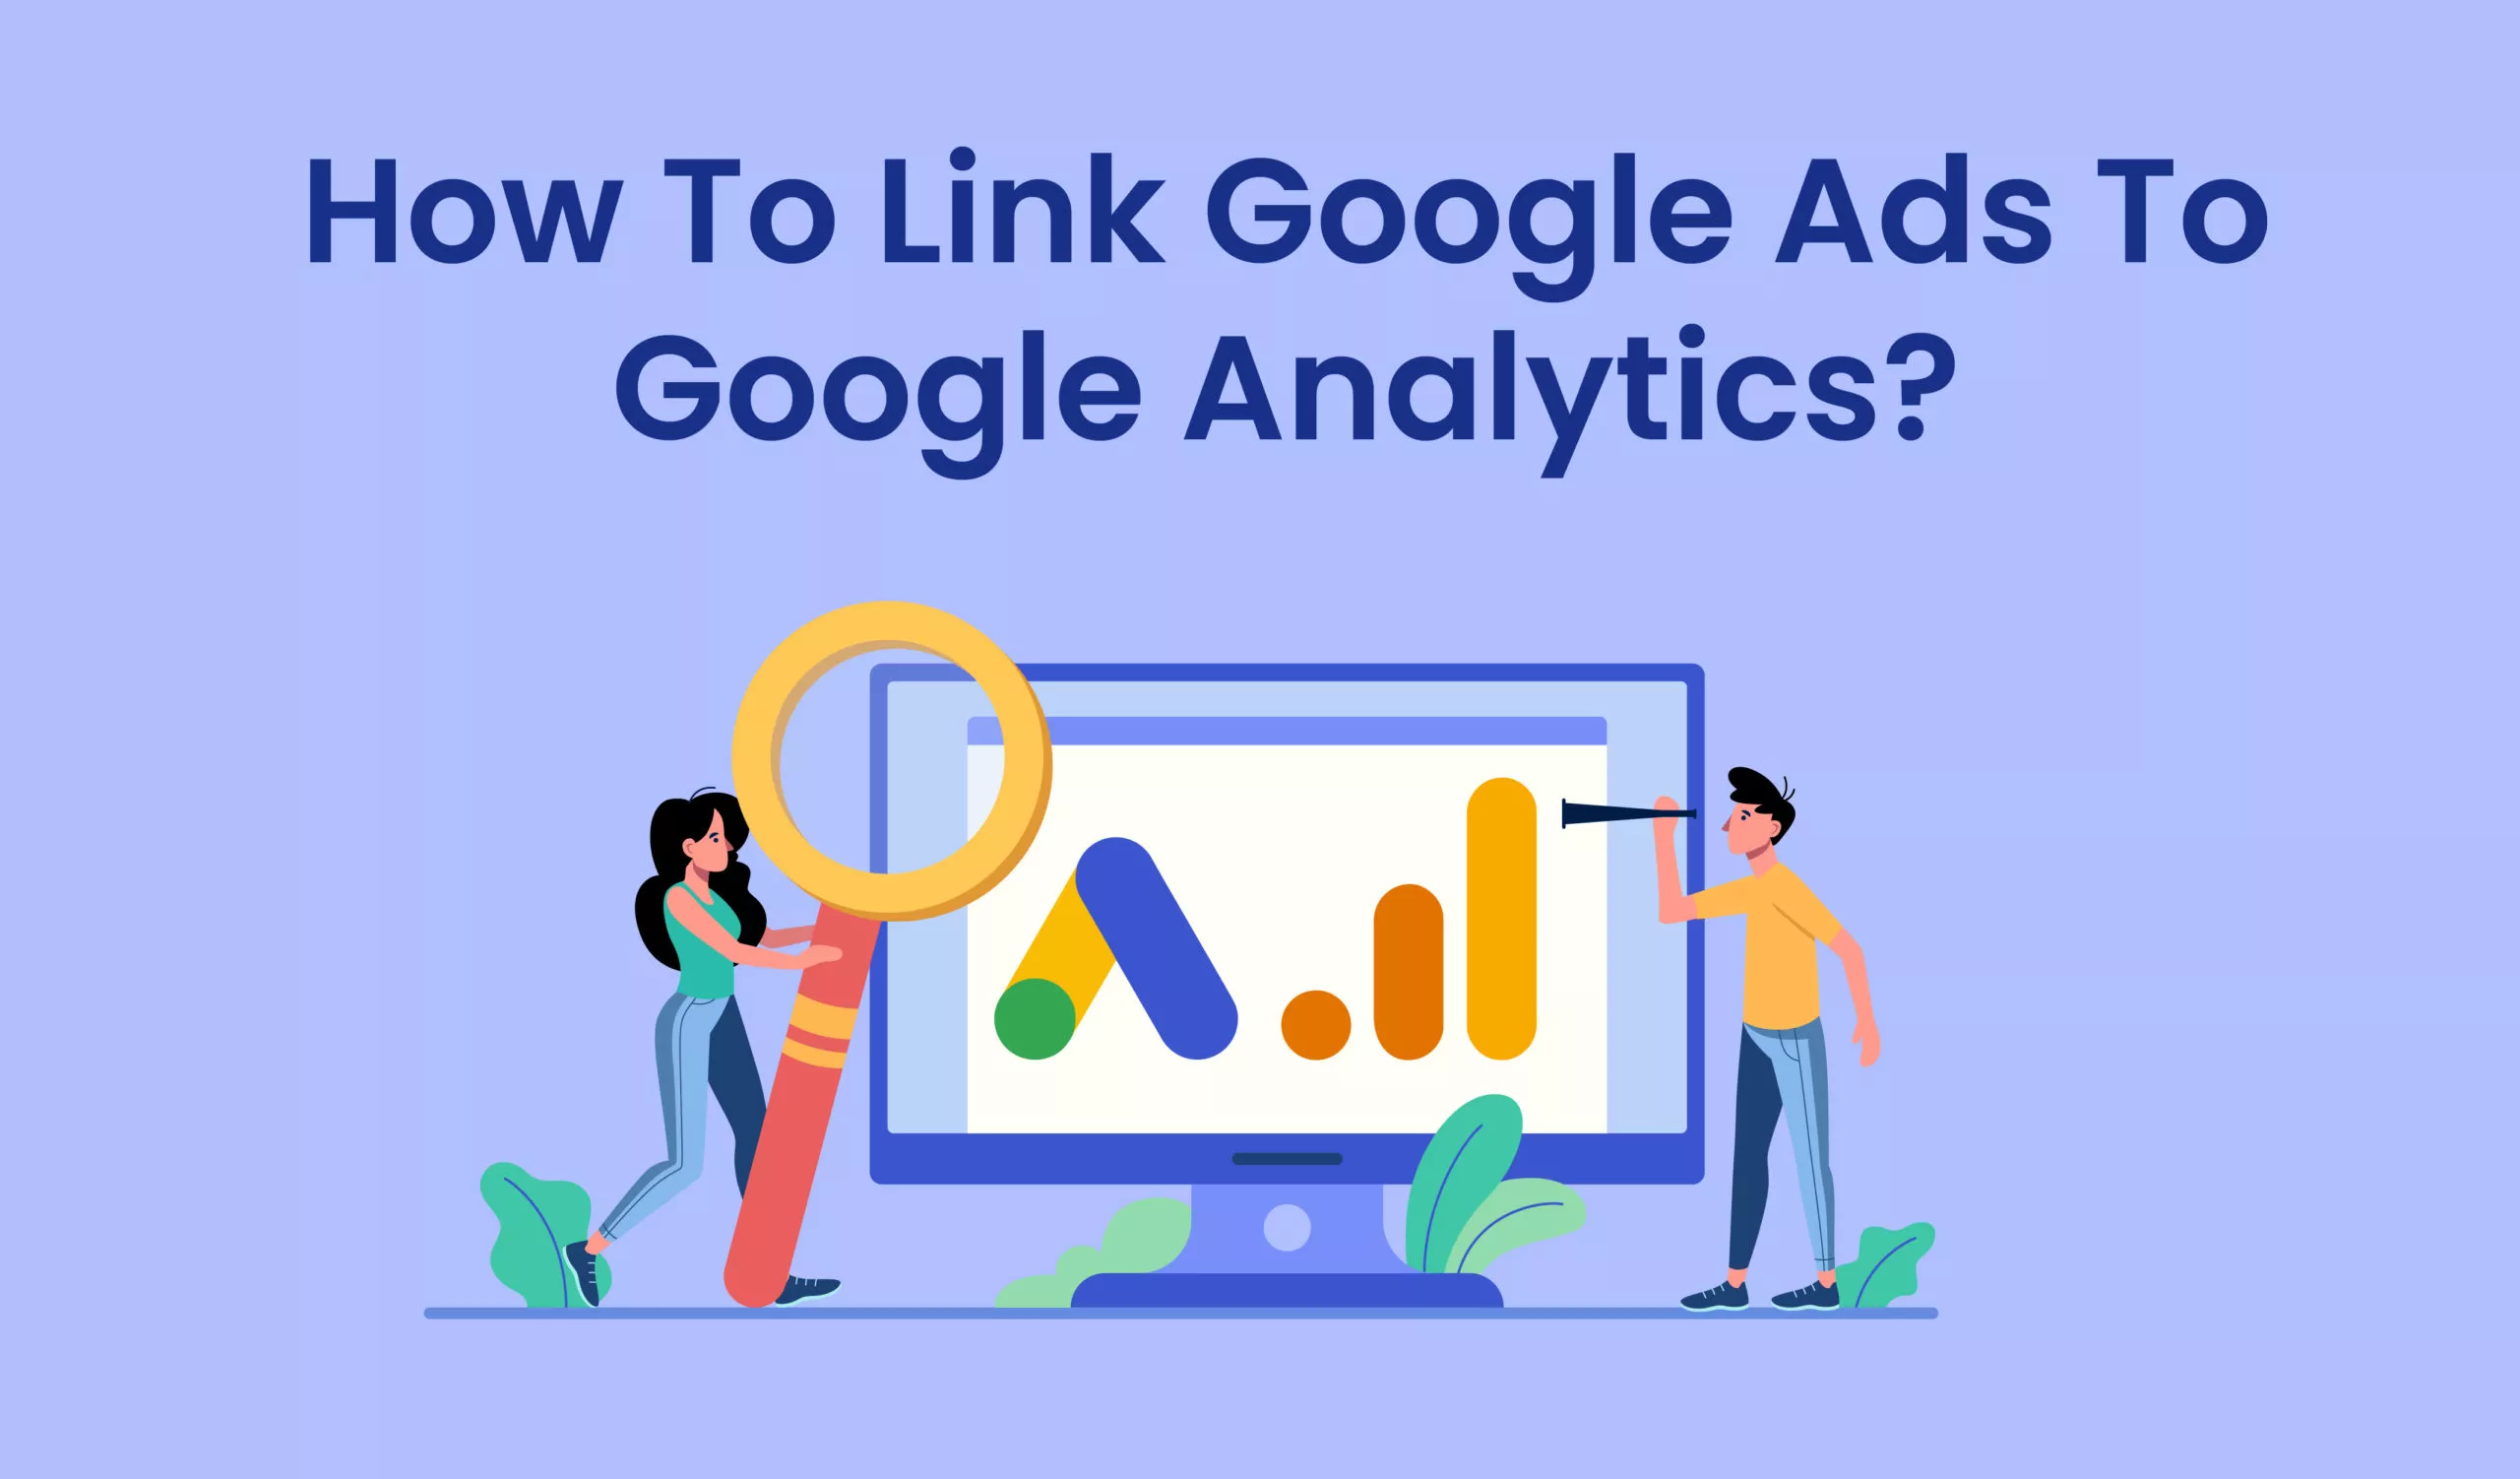 How to link Google Ads to Google Analytics?